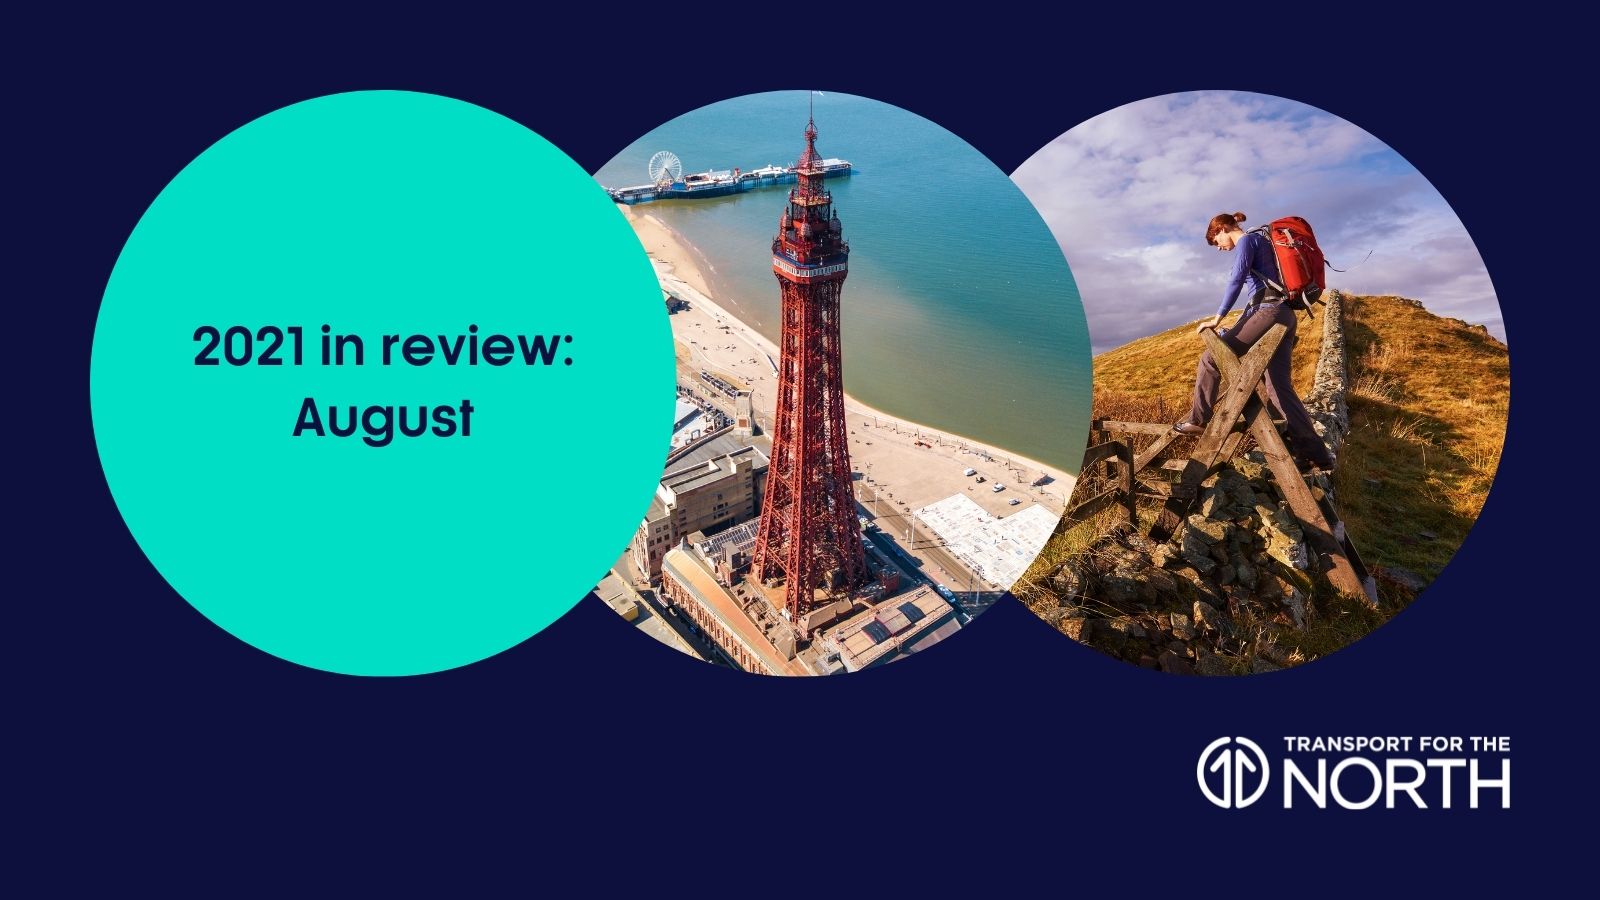 August 2021 review with Blackpool tower and woman hiking in Pennines